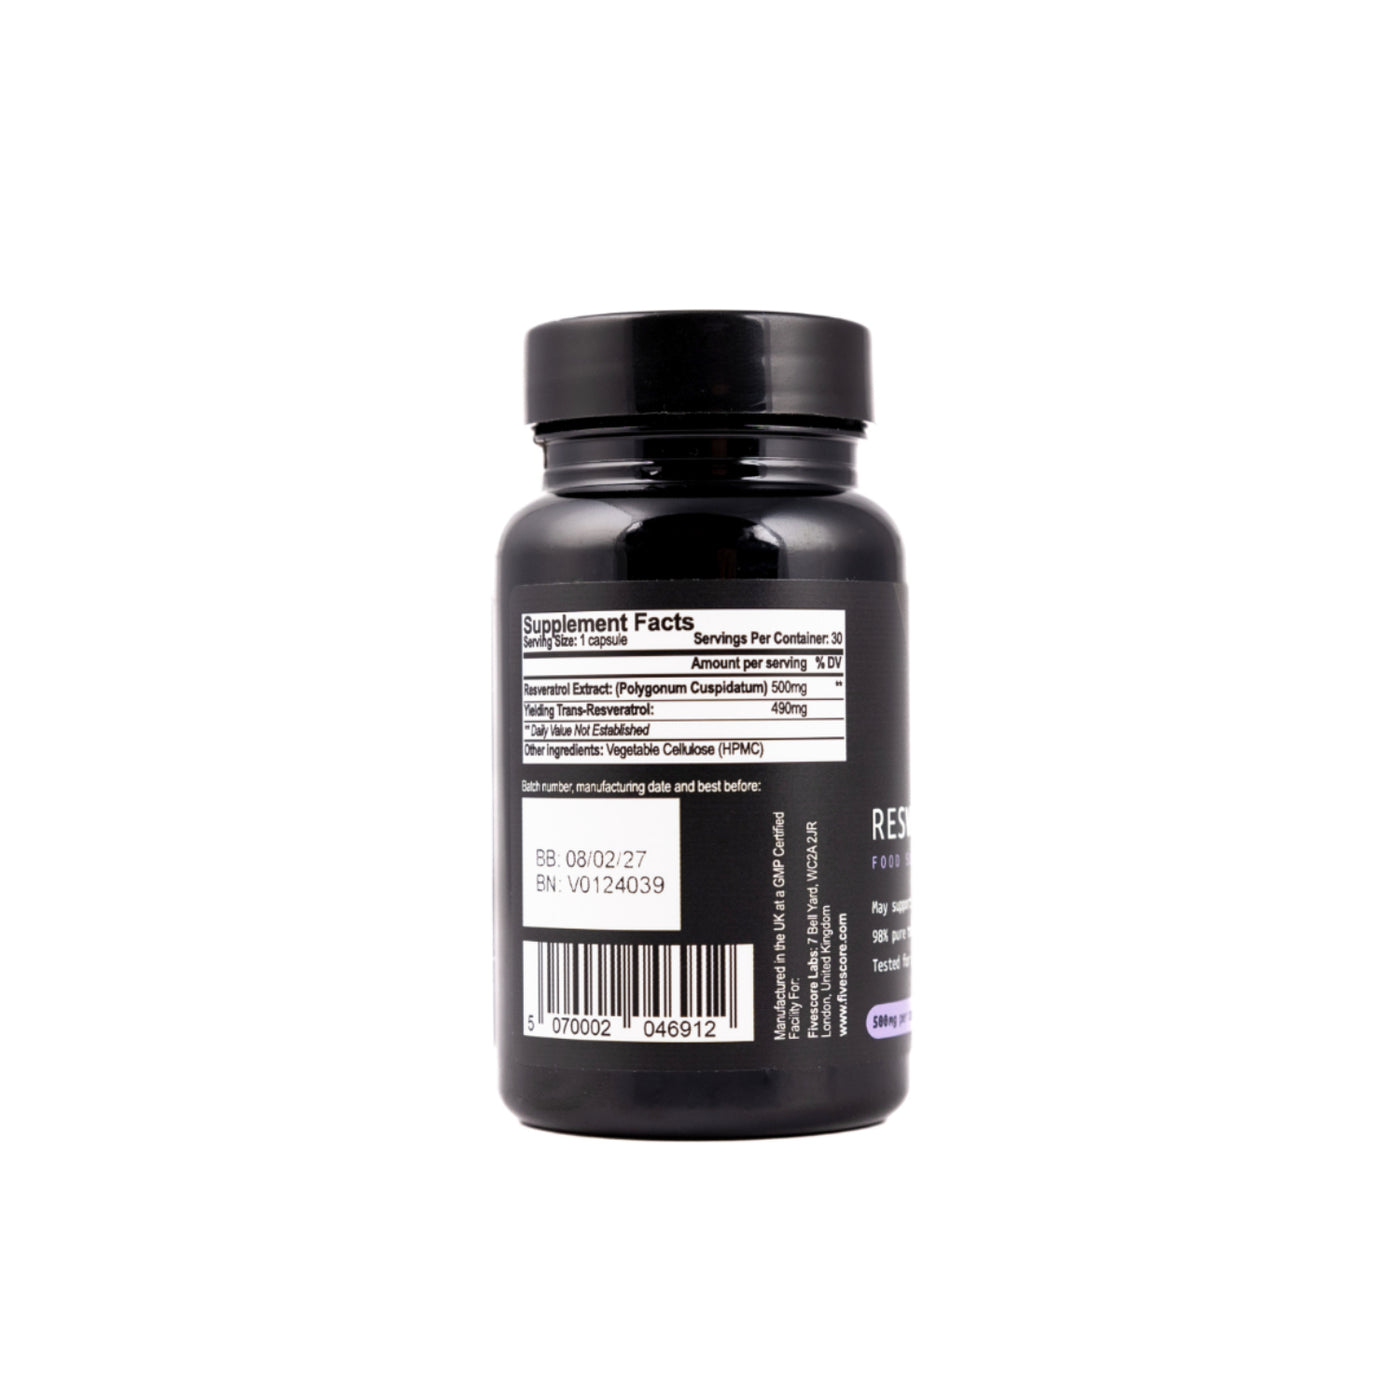 Ultra-High Purity Resveratrol – 98% Pure (3rd Party Lab Tested)